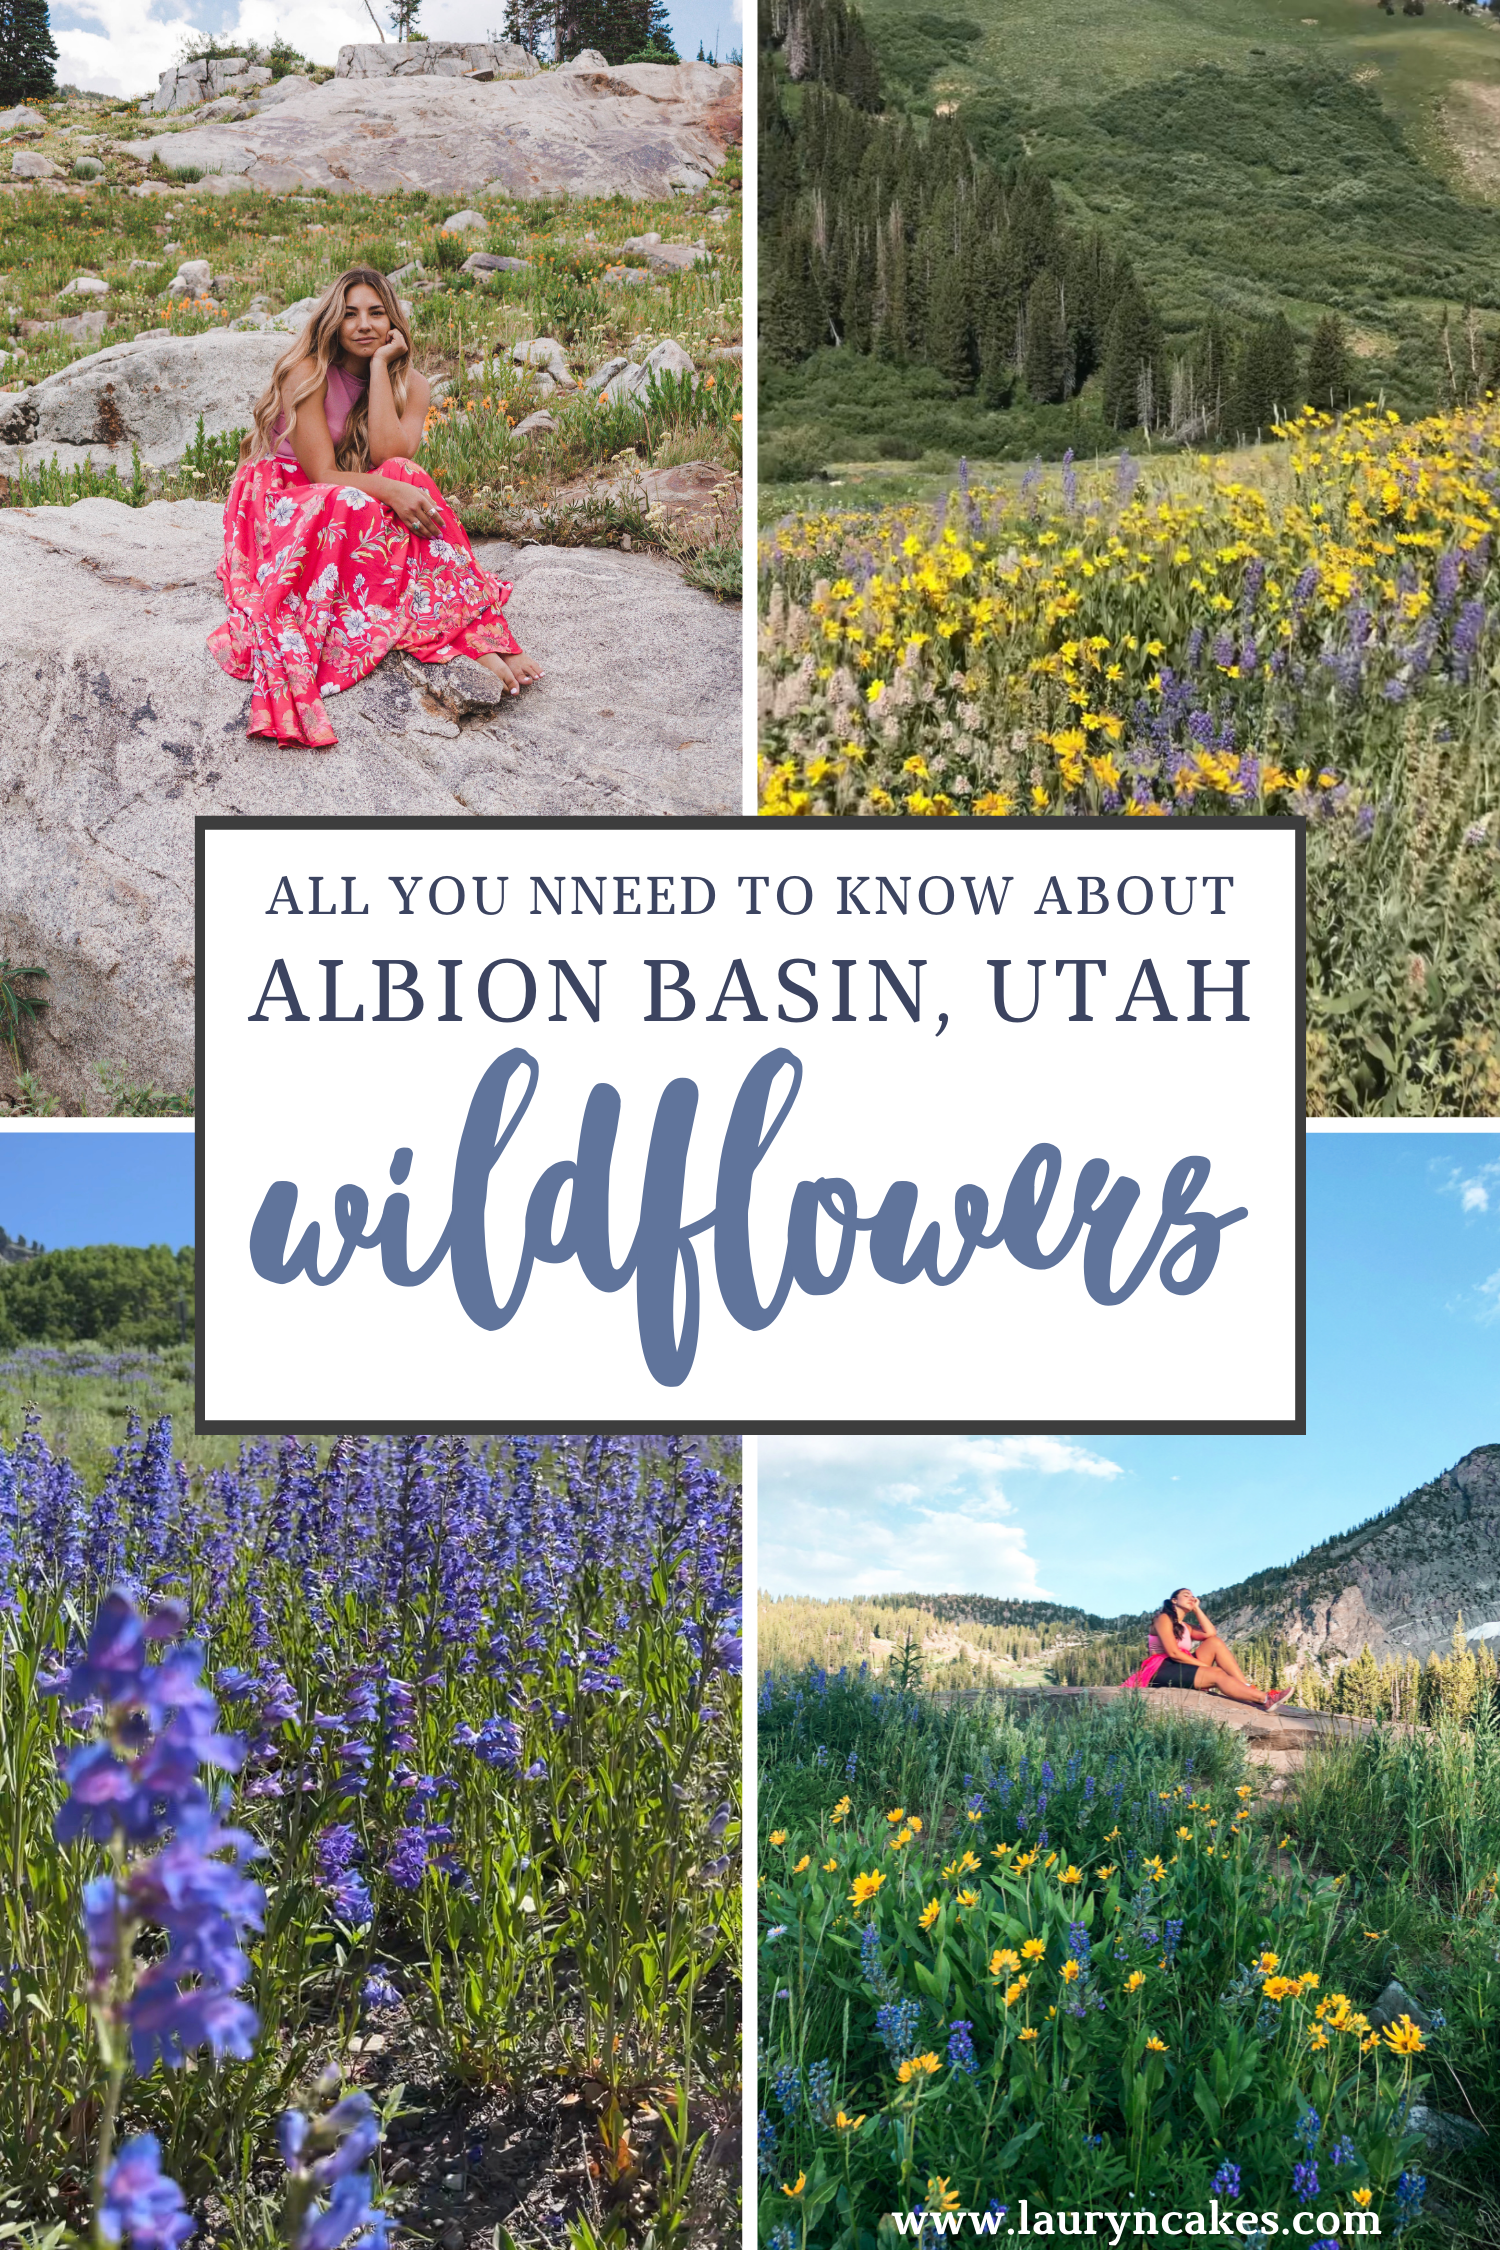 Image has words" all you need to know about Albion Basin Wildflowers" over a collage of 4 photos showcasing the mountain flowers blooming and Lauryncakes sitting on granite rocks in the meadows